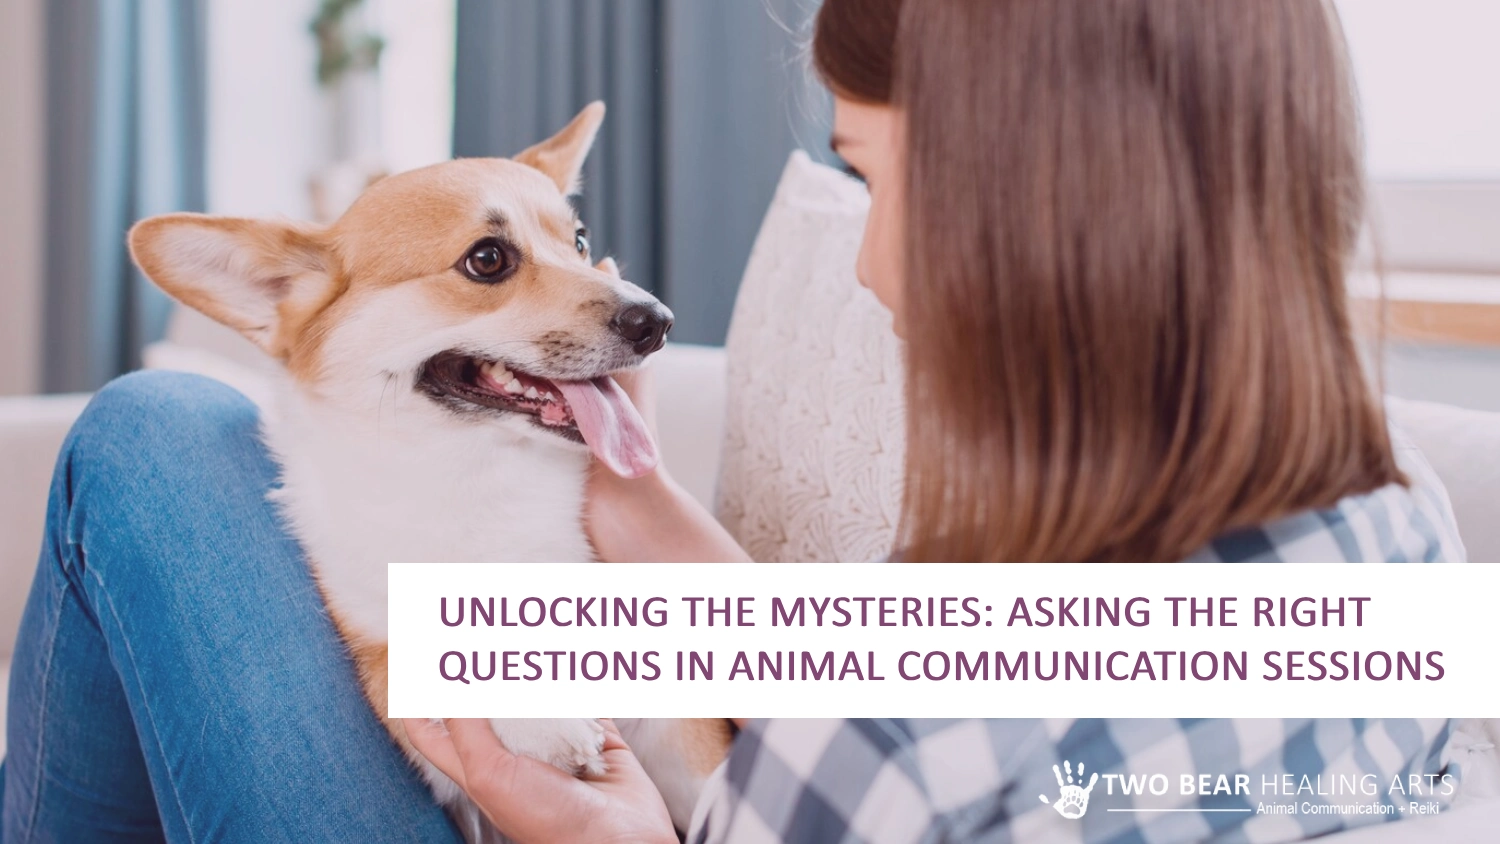 Curious about your pet's inner world? Image of a dog cuddling with its owner on a couch. Learn how to ask the right questions in animal communication sessions to unlock a deeper understanding of your furry friend.